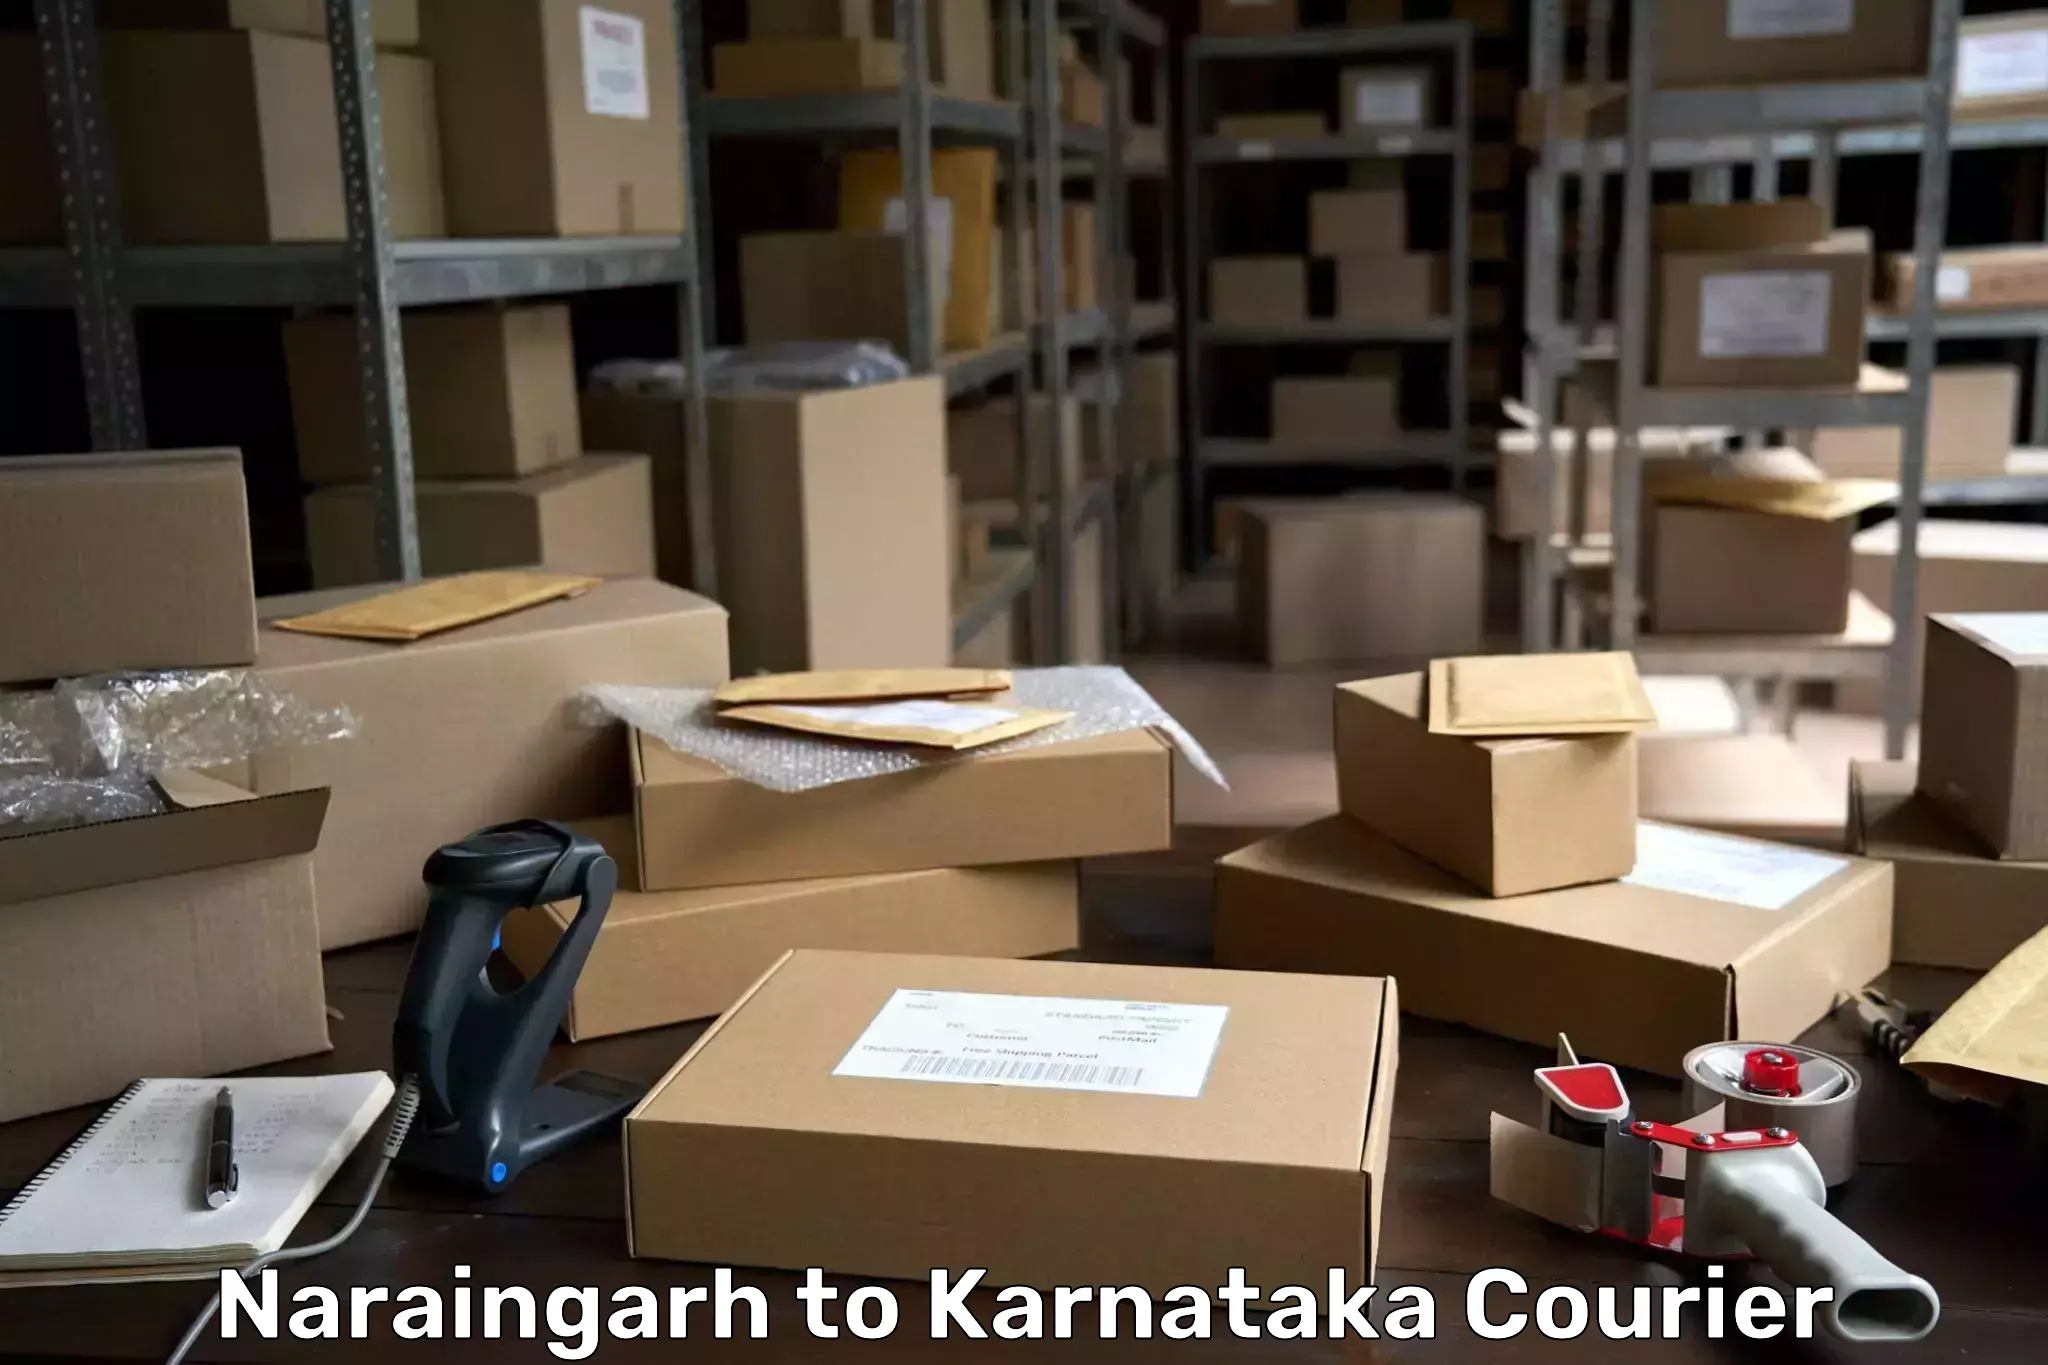 State-of-the-art courier technology Naraingarh to Alnavar